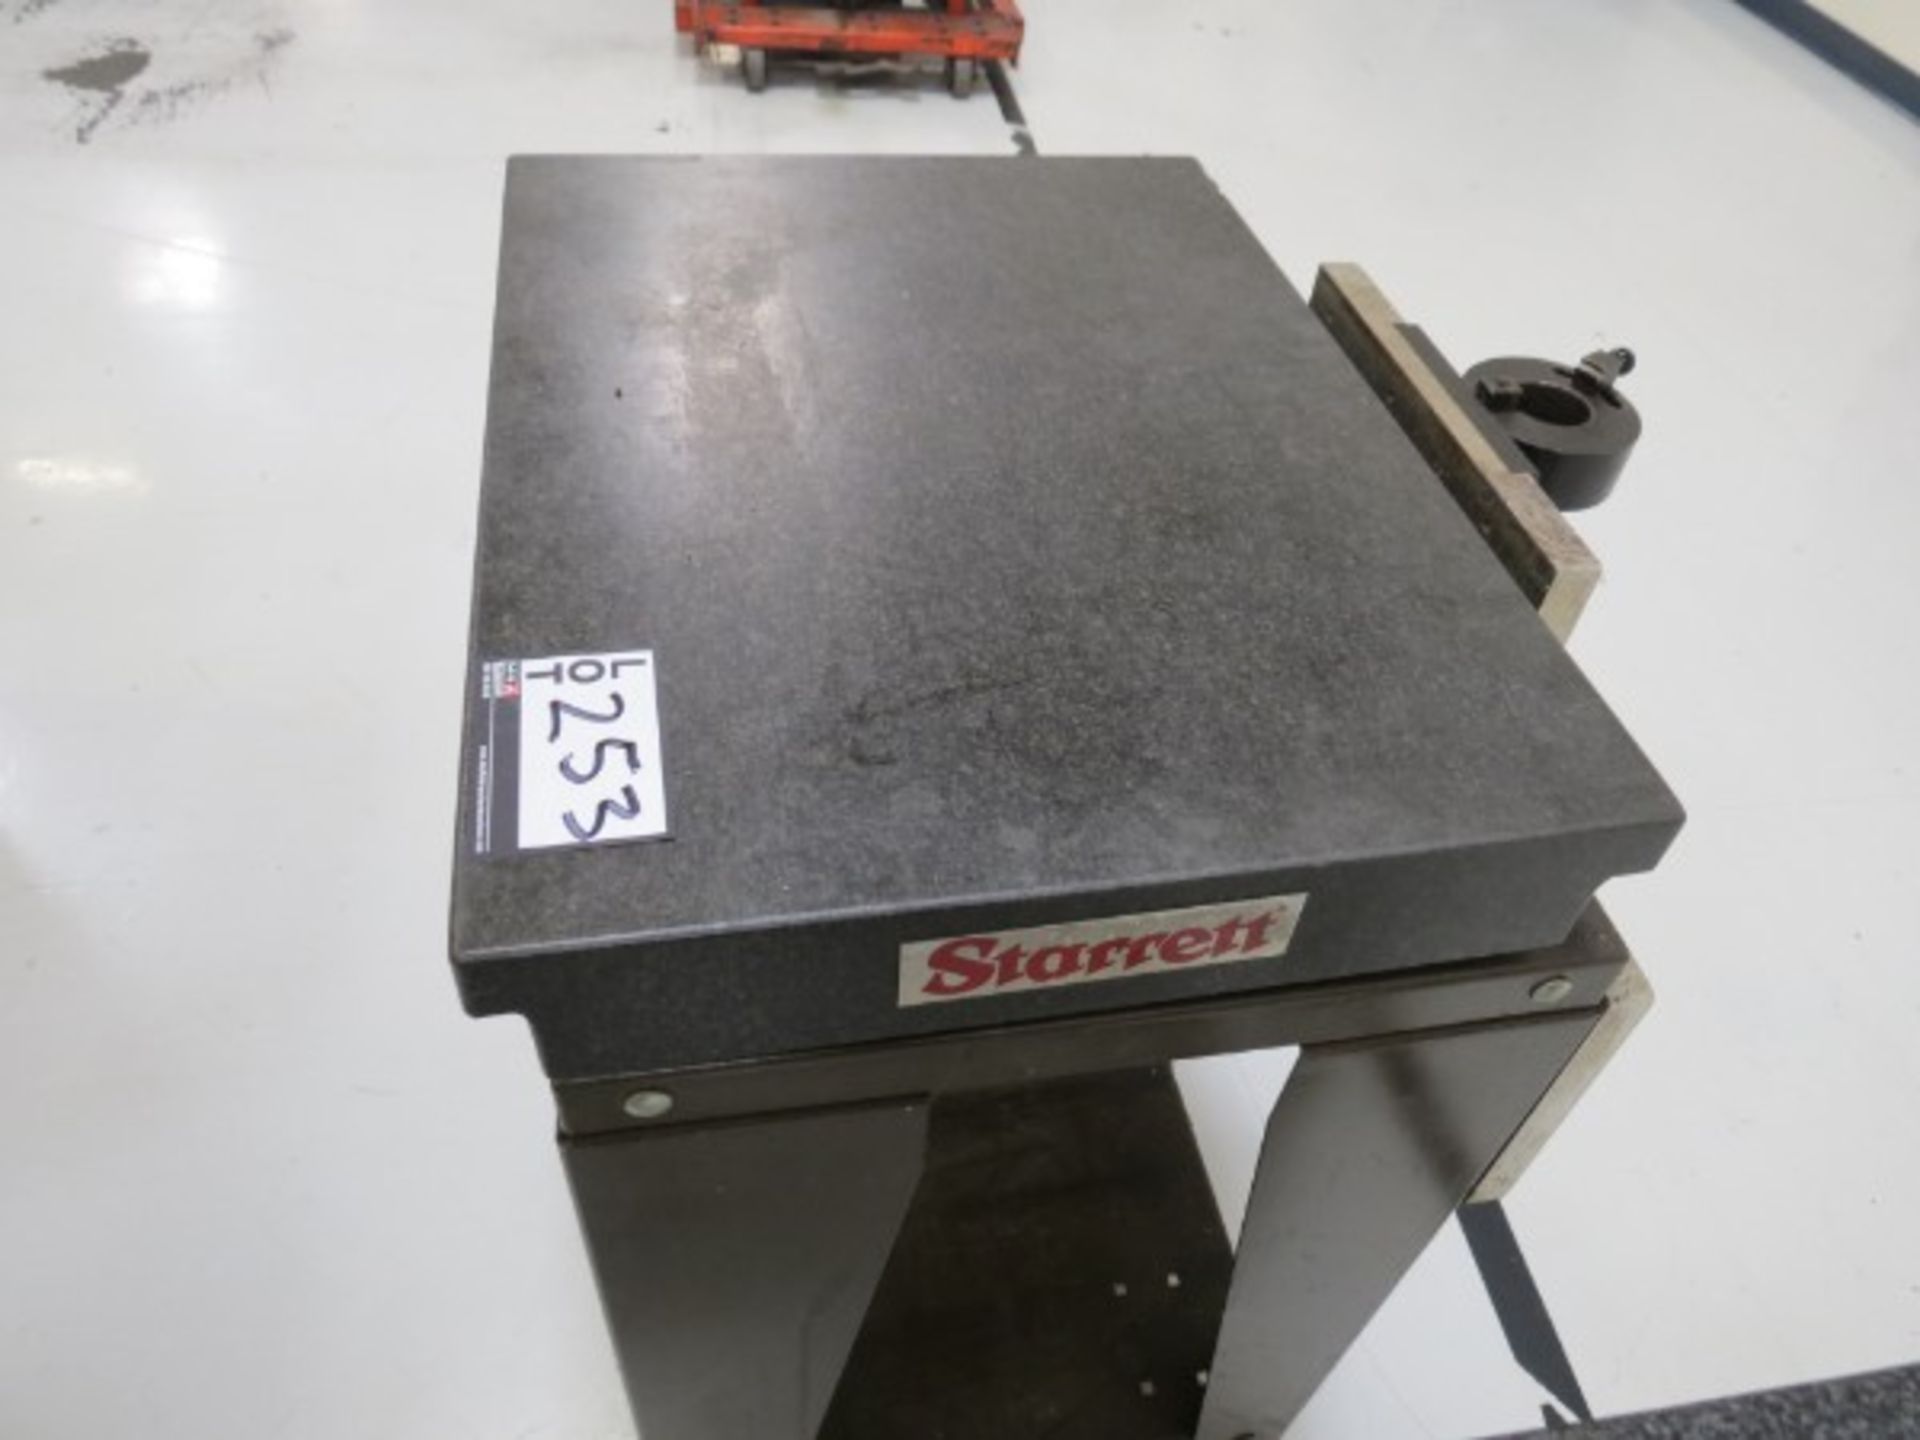 Starrett 24" x 18" x 3" Grade B Granite Surface Plate, S/N i9251, with Steel Stand - Image 2 of 2